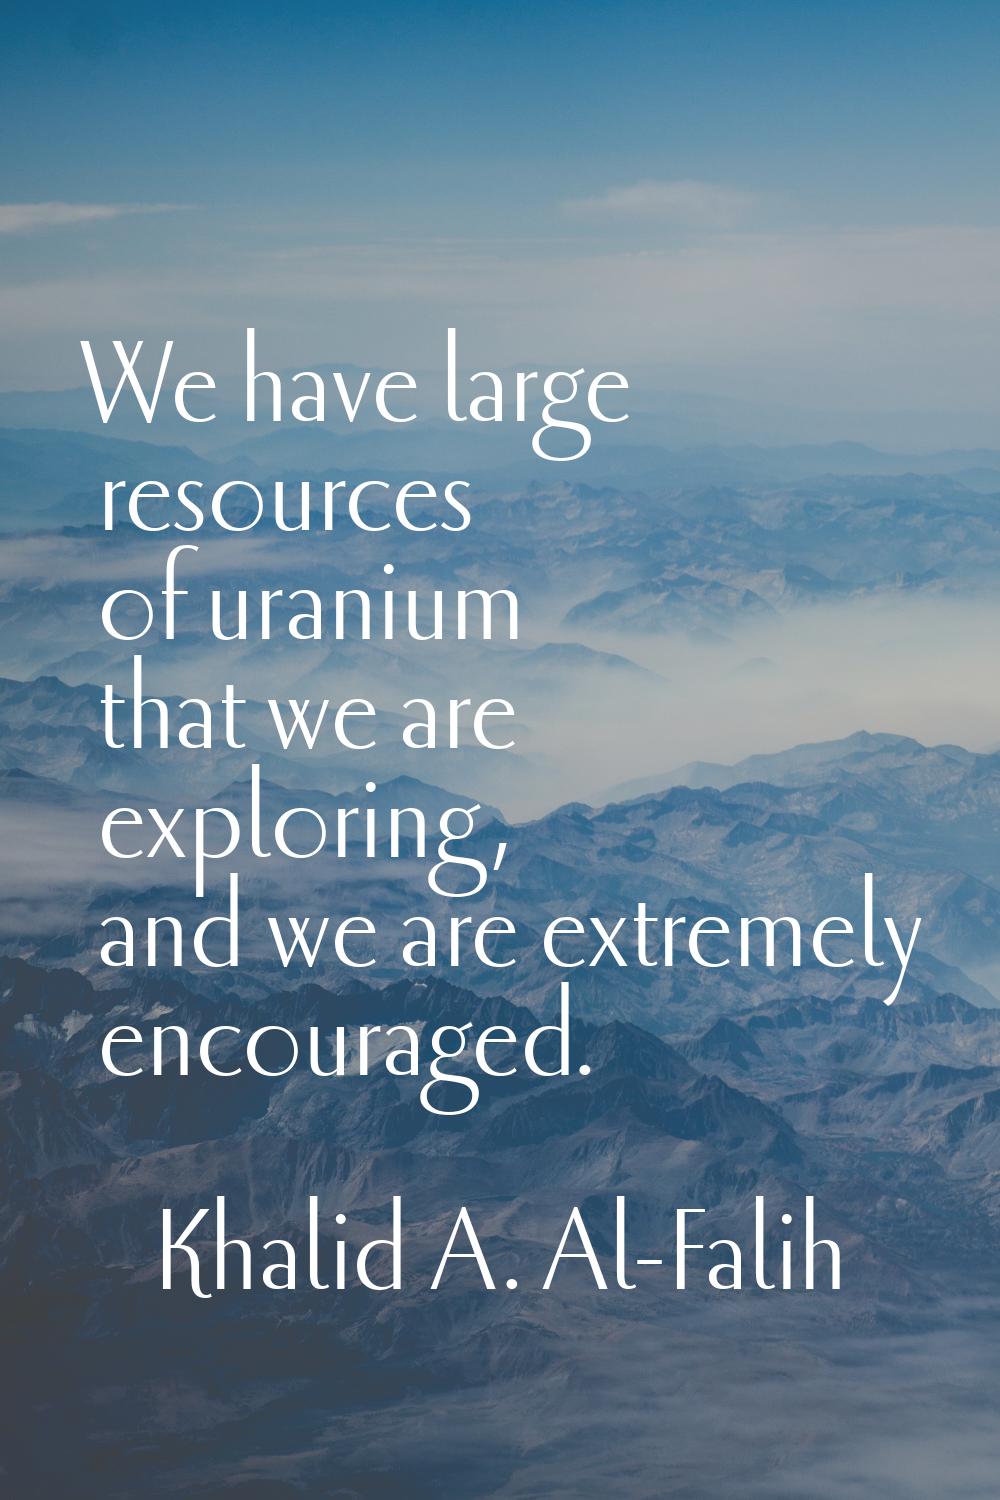 We have large resources of uranium that we are exploring, and we are extremely encouraged.